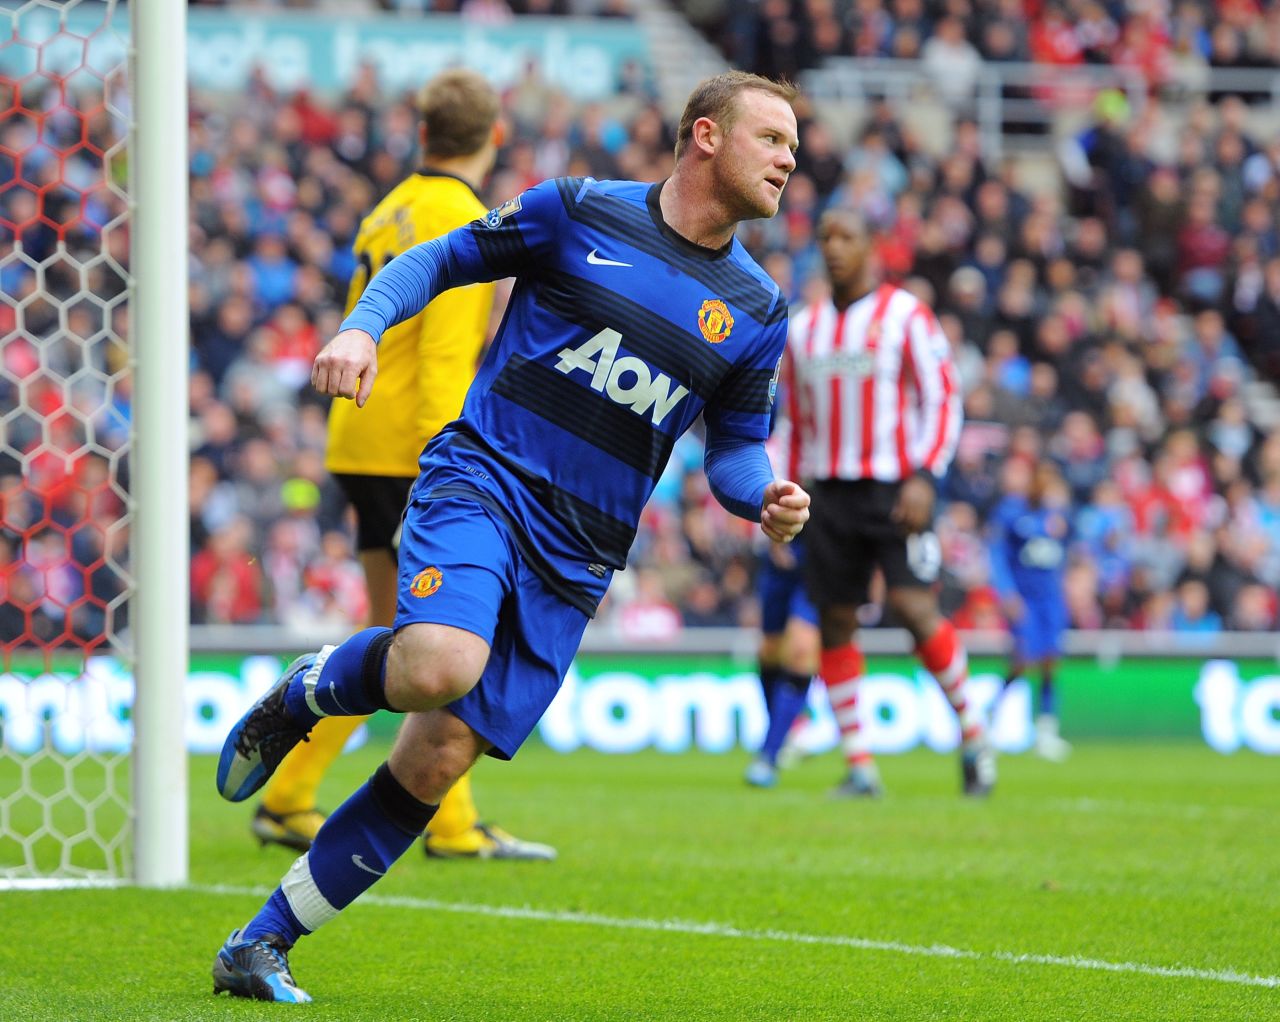 20 mins: Manchester United, relying on City to slip up against QPR, score first through Wayne Rooney in their must-win match at Sunderland. Advantage United!